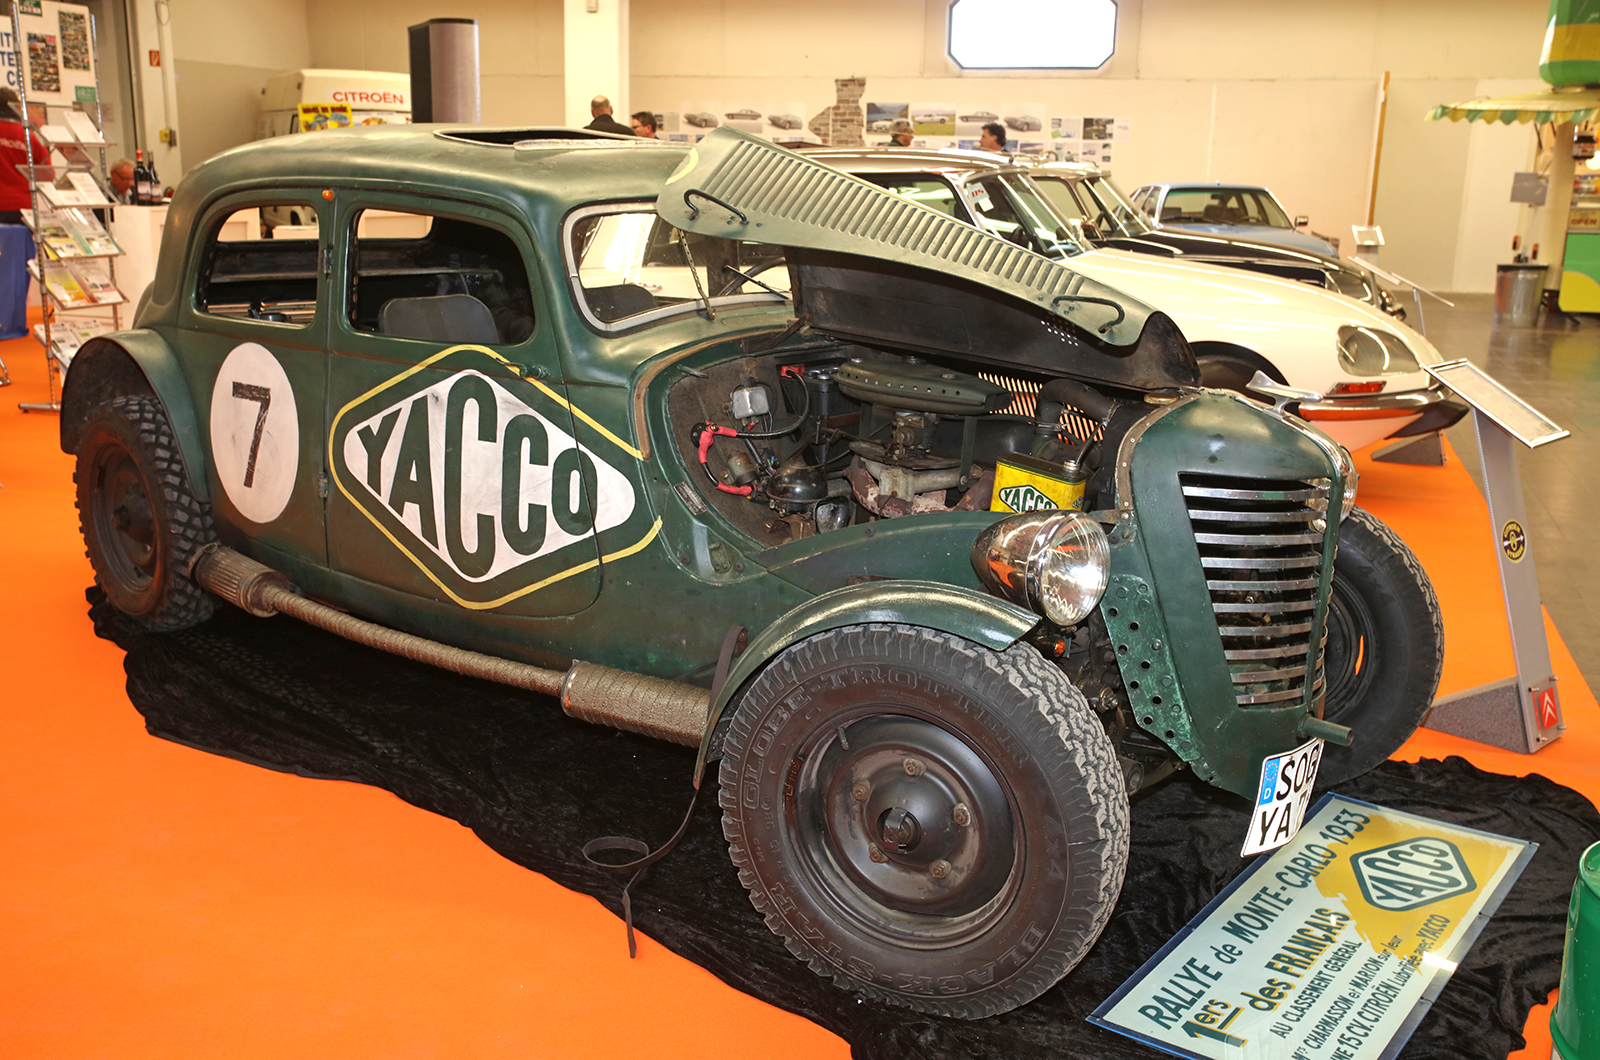 German marques lead the way at Techno-Classica Essen